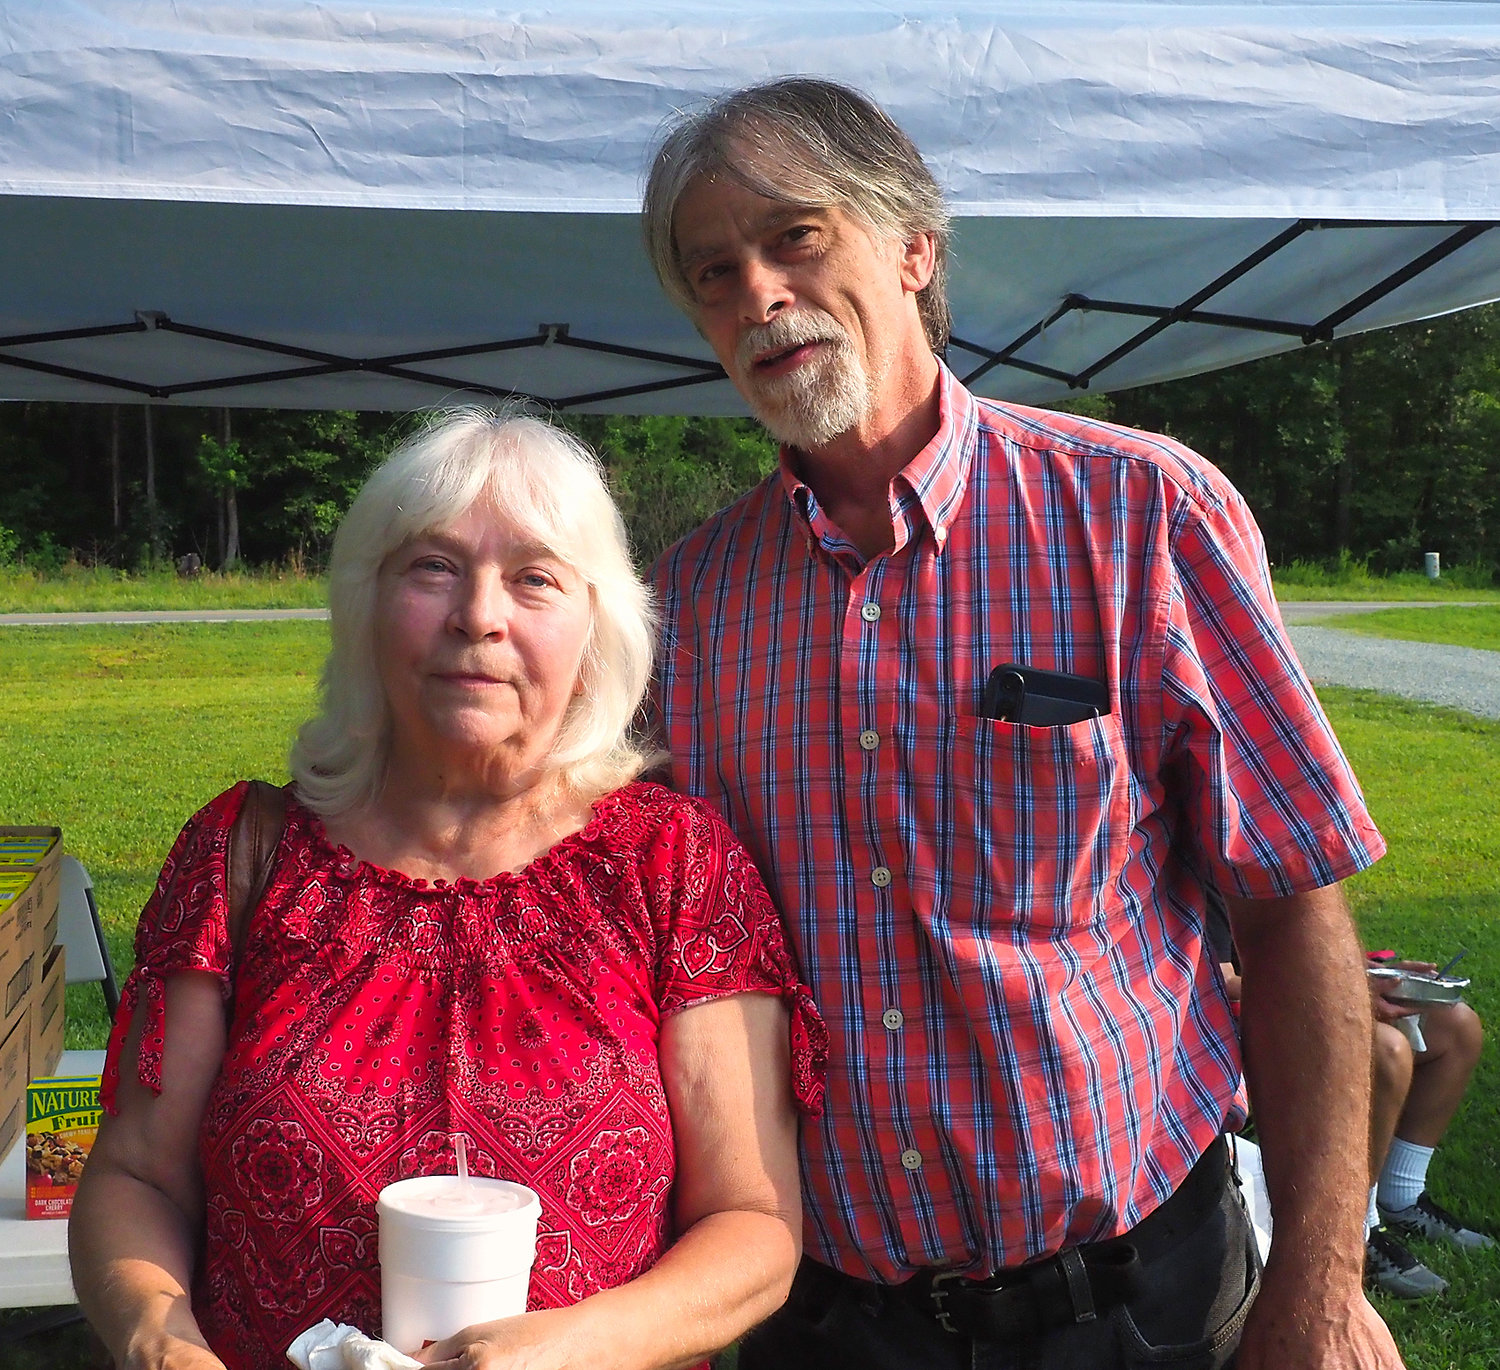 Jim and Judy Shaw of the Chatham United Methodist Church dropped by Cedar Grove UMC's 'summer fiesta' last Saturday in Pittsboro. Danny Berrier pastors both churches.